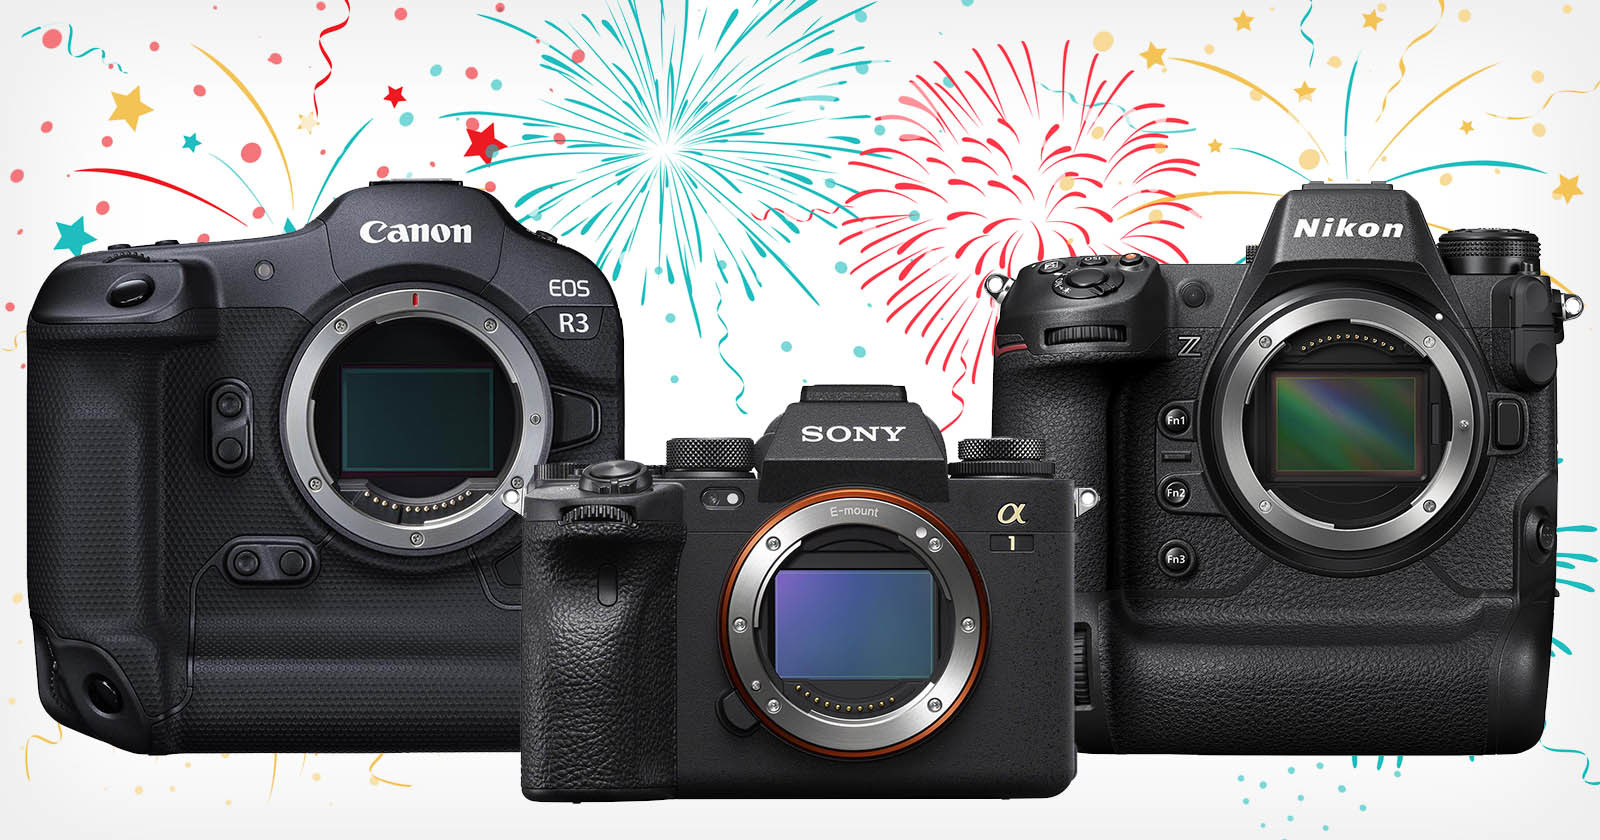 2022 Was Officially the Year of the Mirrorless Camera